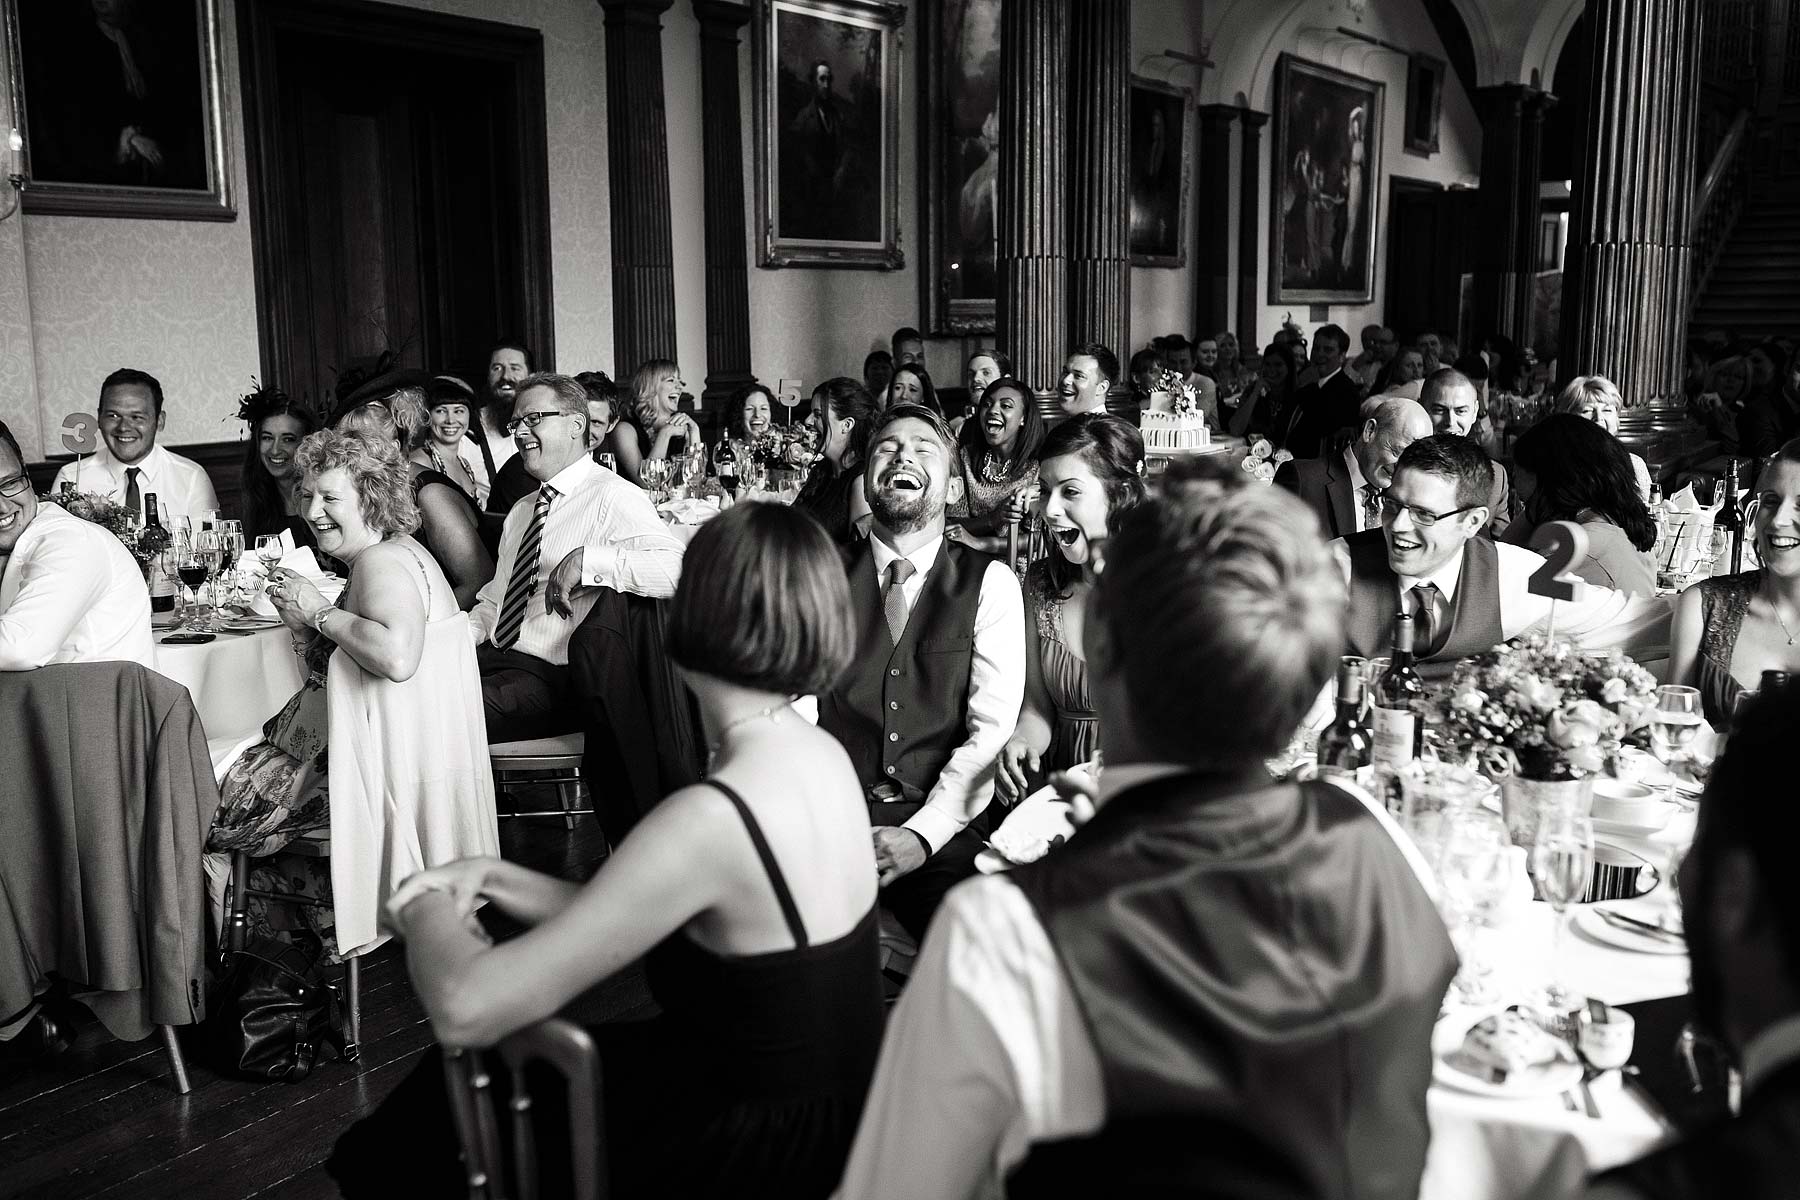 Reportage photos of the wedding speeches at Sandon Hall in Stafford showing the emotion, reaction and fun by Stafford Documentary Wedding Photographer Stuart James